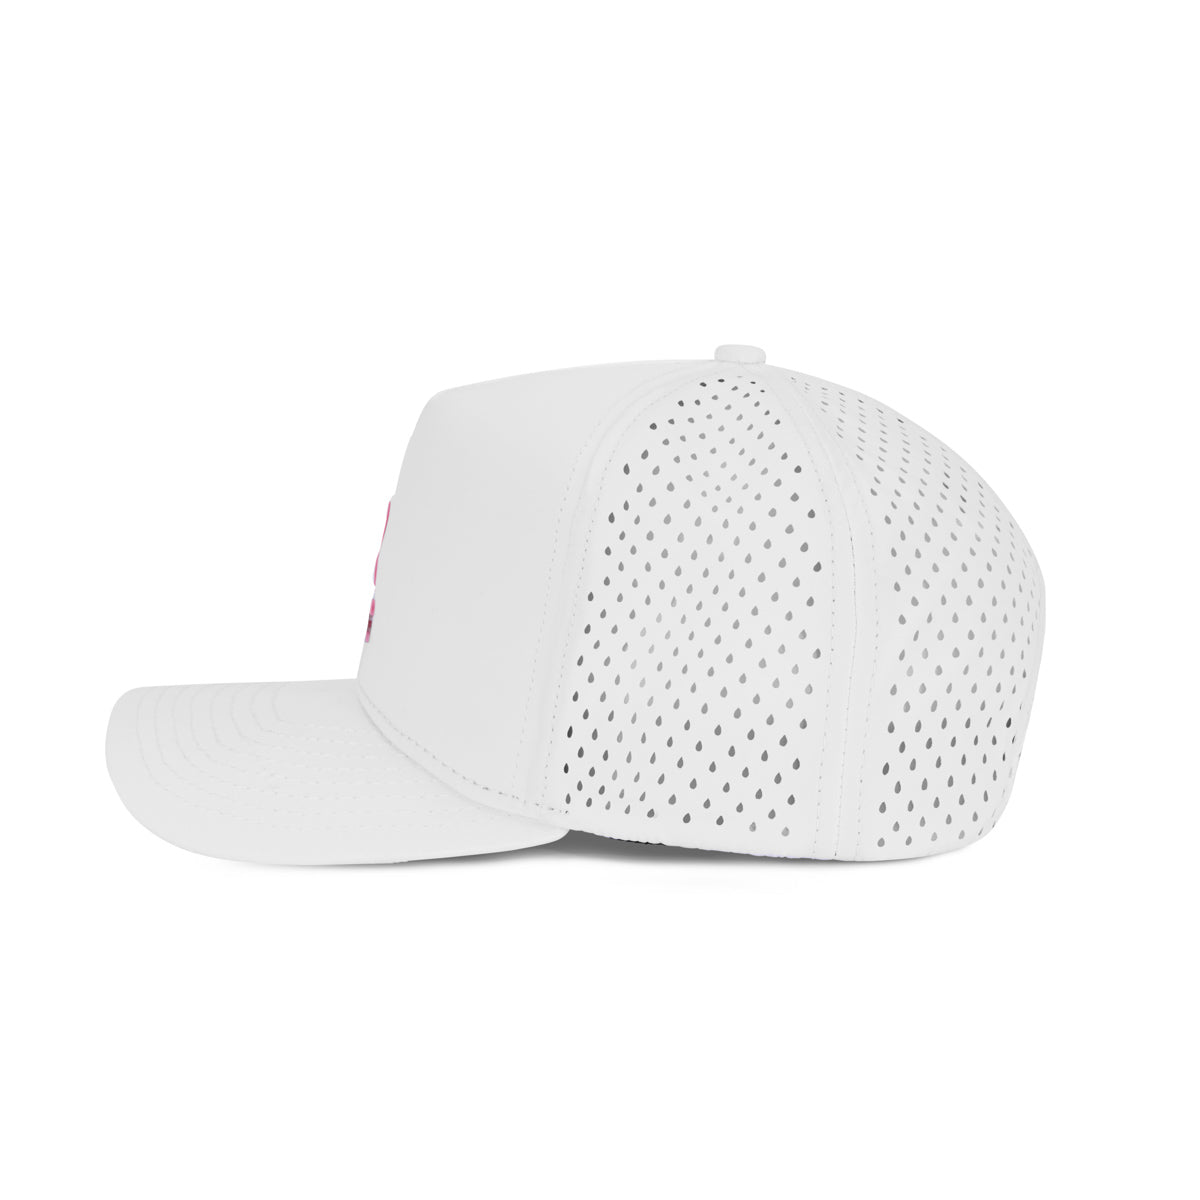 Barstool Golf Flower Crossed Tees Performance Hat-Hats-Fore Play-Barstool Sports